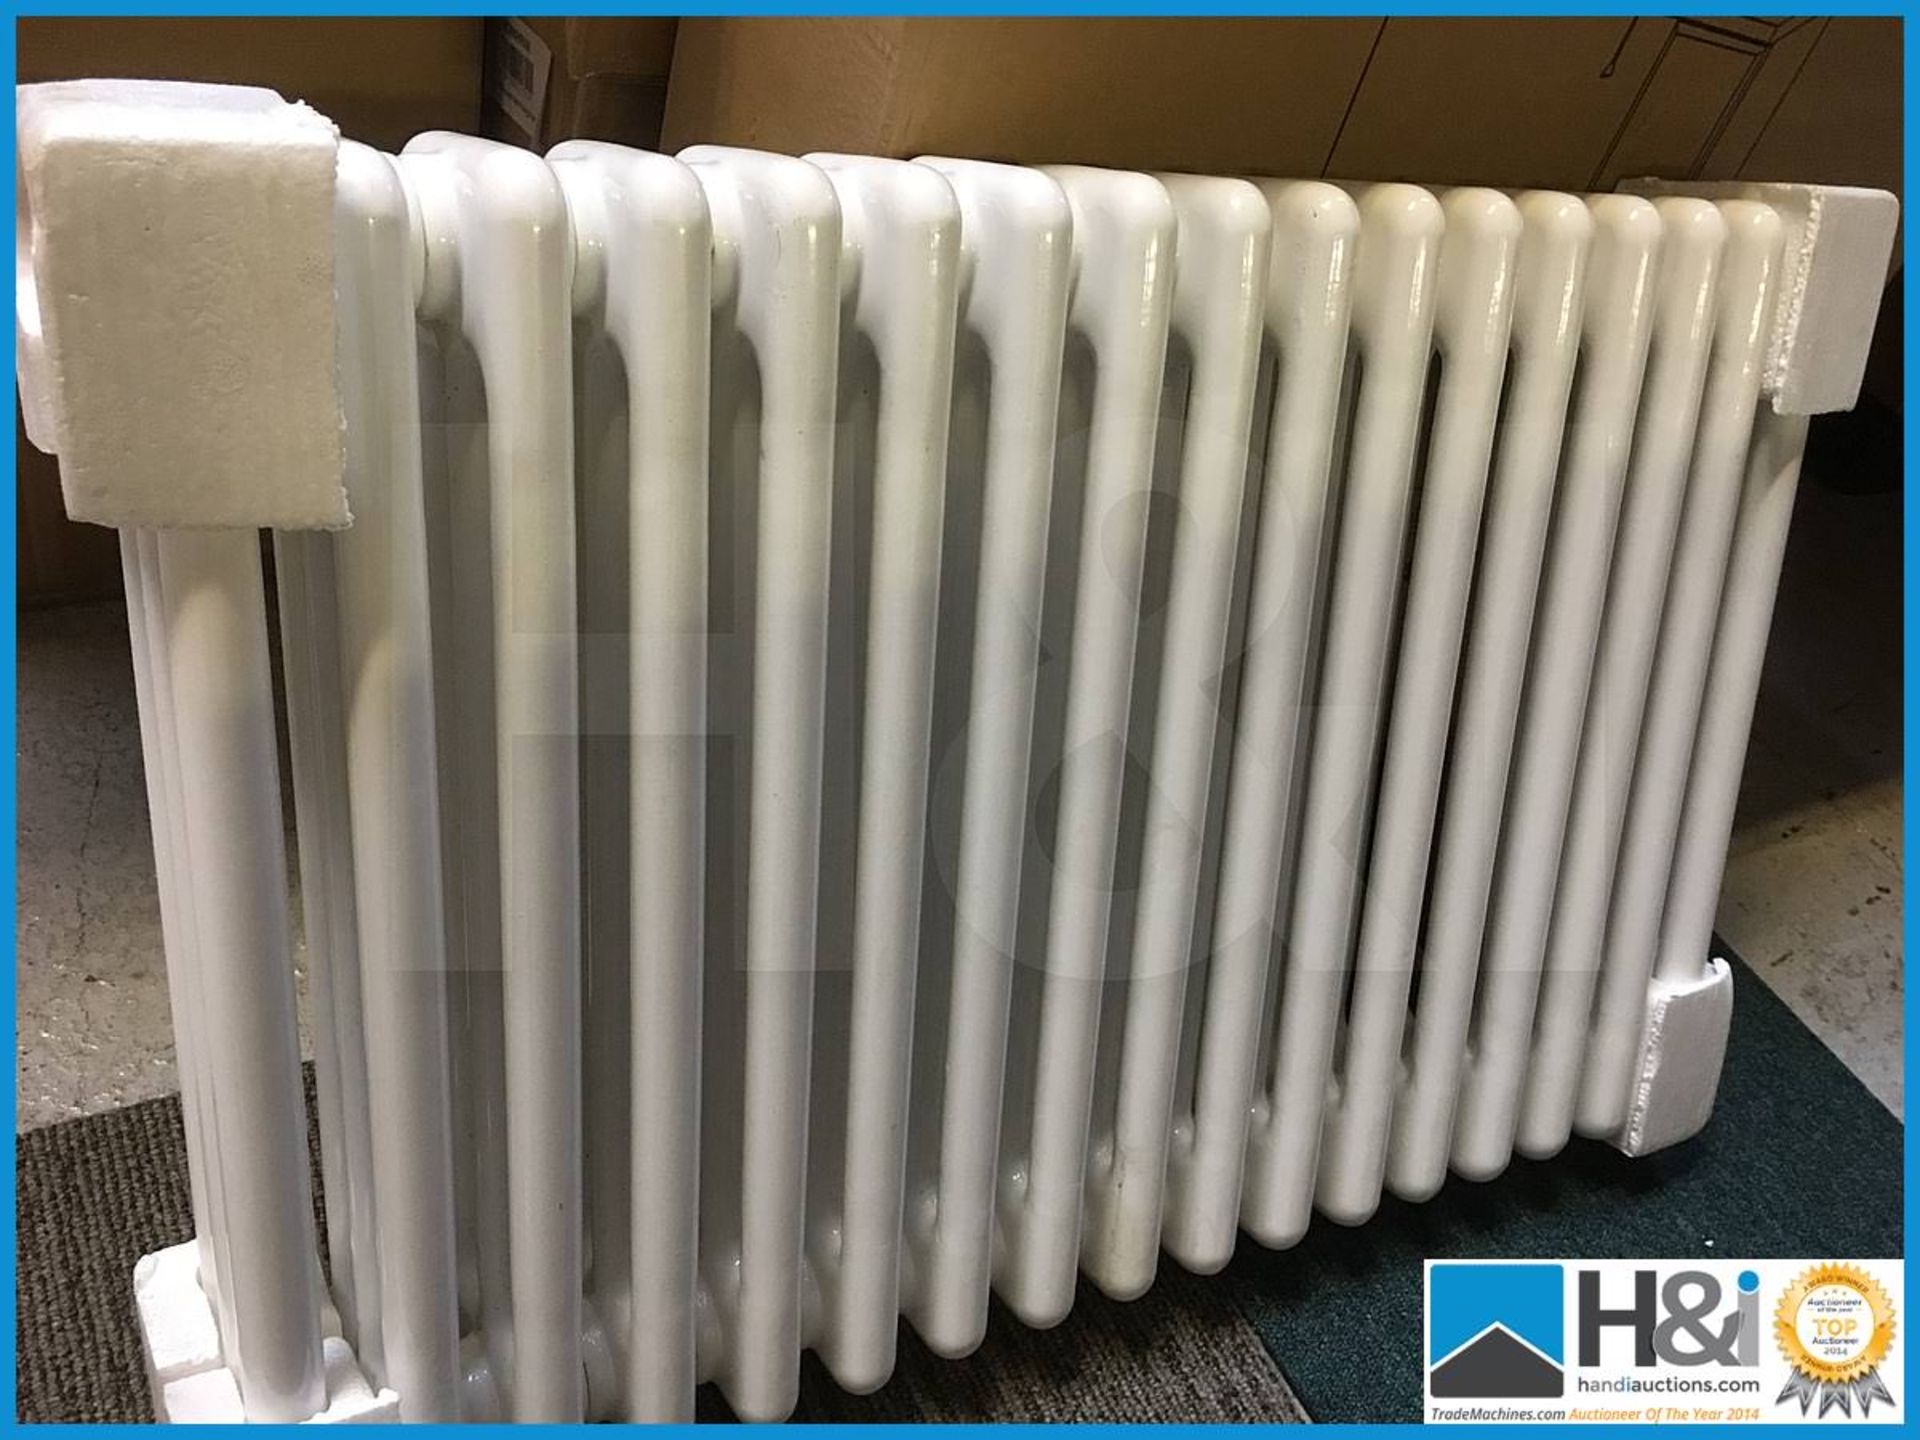 Stunning designer traditional style 3 column radiator in white finish. 750x600. Includes end caps